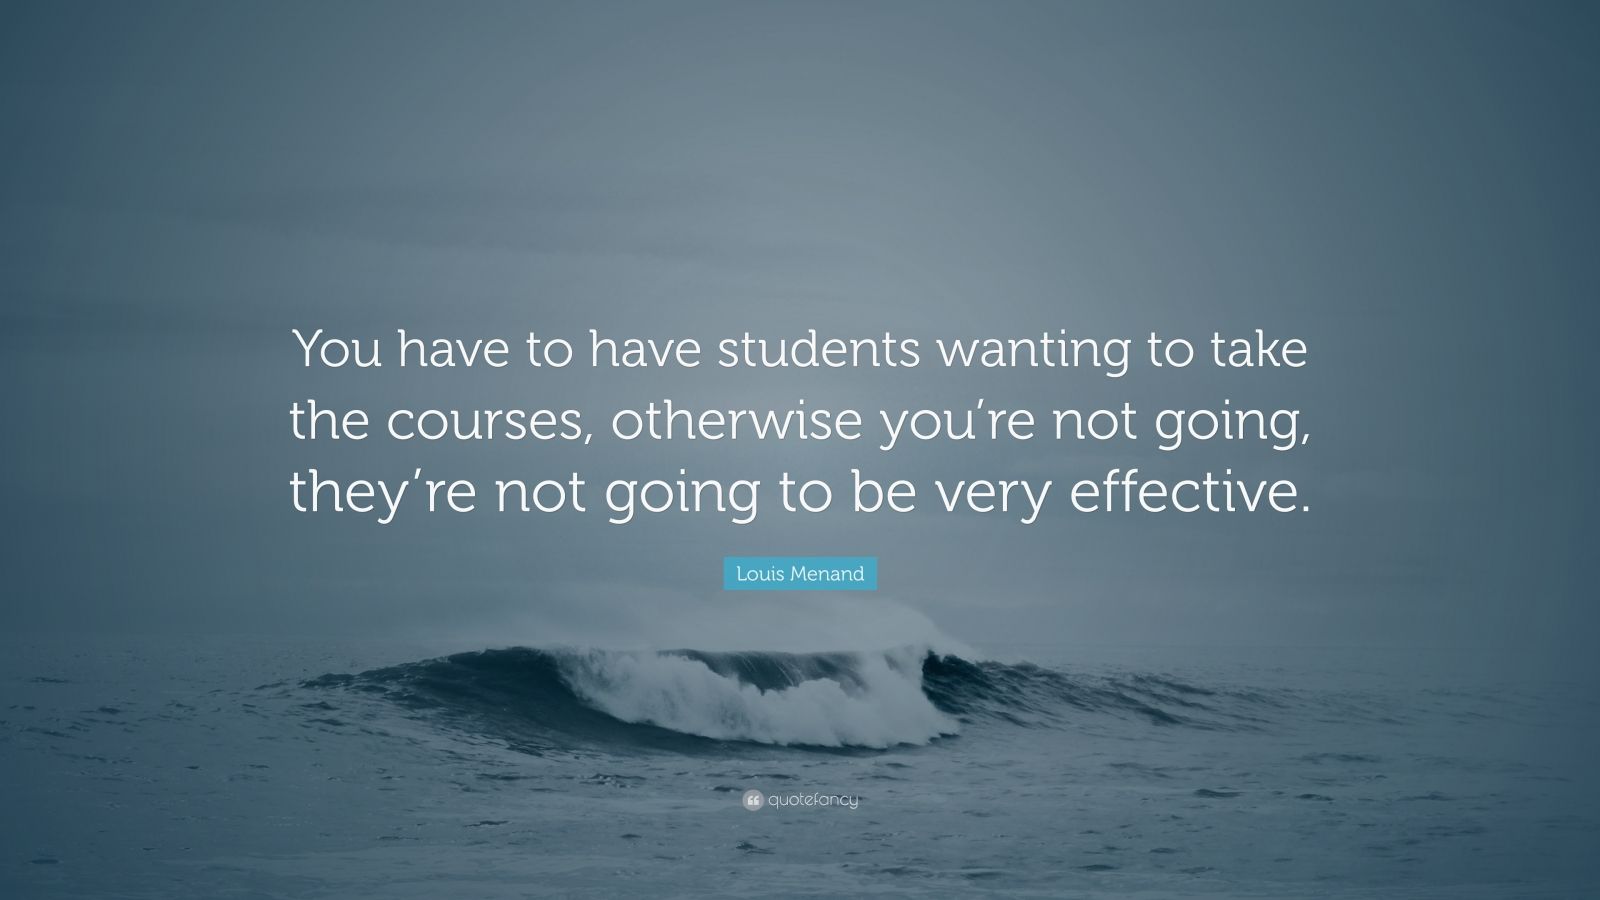 Louis Menand Quote: “You have to have students wanting to take the courses, otherwise you’re not ...